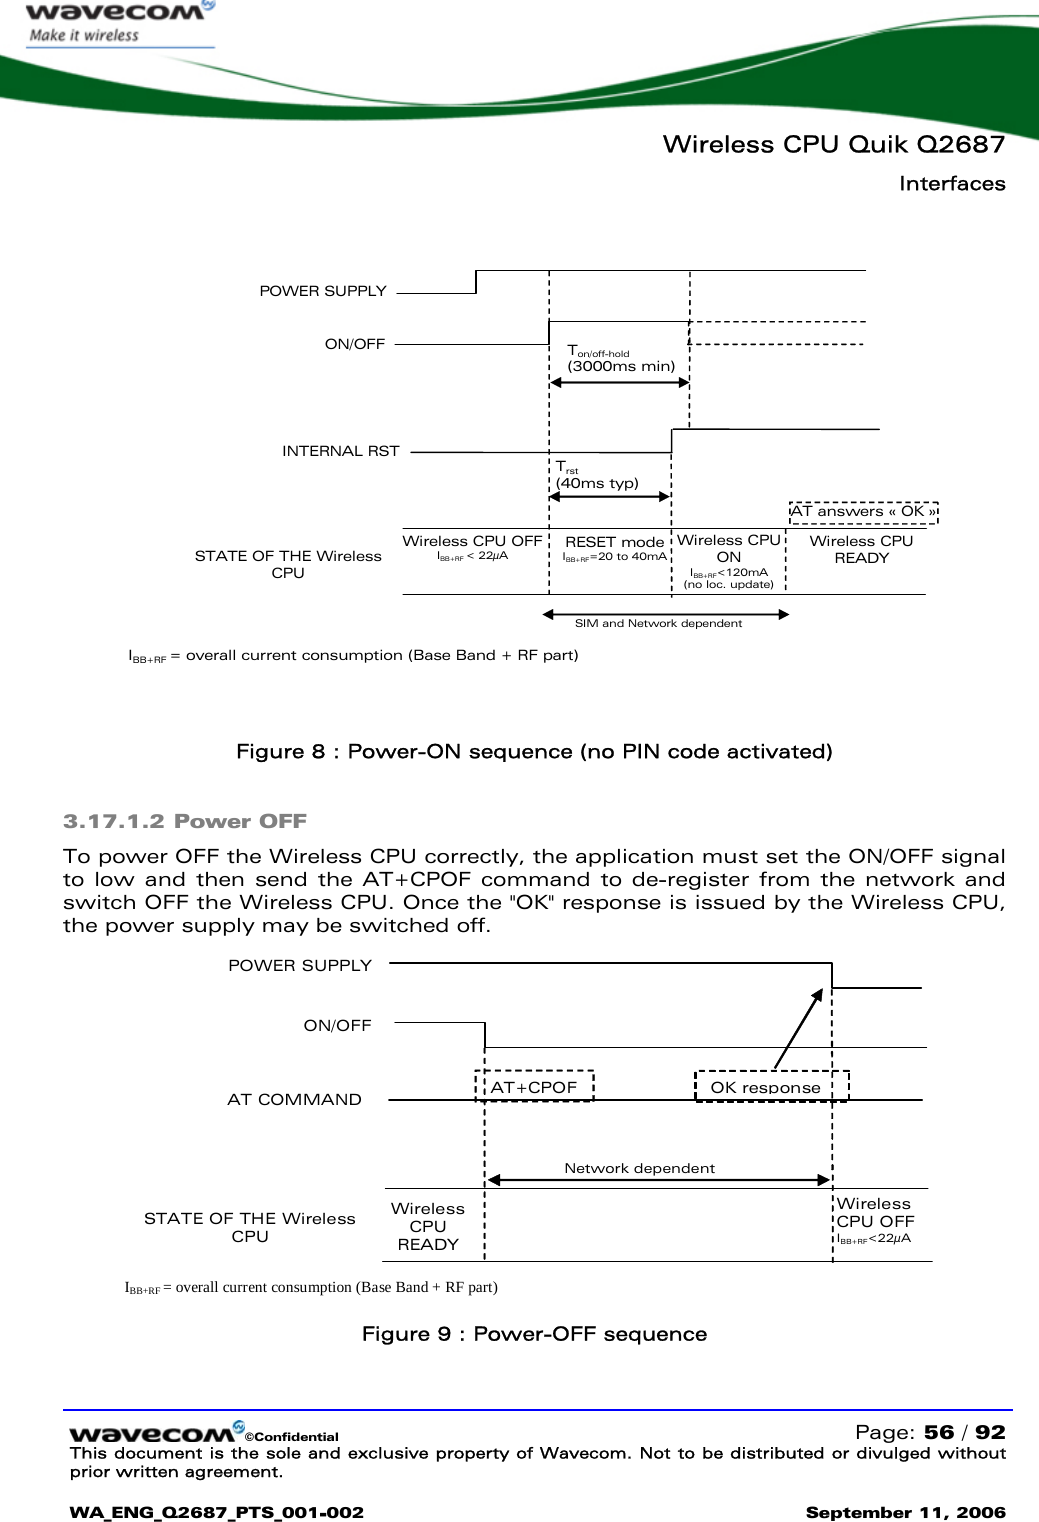   Wireless CPU Quik Q2687 Interfaces   ©Confidential   Page: 56 / 92 This document is the sole and exclusive property of Wavecom. Not to be distributed or divulged without prior written agreement.  WA_ENG_Q2687_PTS_001-002 September 11, 2006    POWER SUPPLY  ON/OFF STATE OF THE Wireless CPU Wireless CPU OFF IBB+RF &lt; 22µA AT answers « OK »Wireless CPU READY Ton/off-hold  (3000ms min) SIM and Network dependent RESET mode IBB+RF=20 to 40mAINTERNAL RST Trst  (40ms typ) Wireless CPU ON IBB+RF&lt;120mA  (no loc. update) IBB+RF = overall current consumption (Base Band + RF part)  Figure 8 : Power-ON sequence (no PIN code activated) 3.17.1.2 Power OFF To power OFF the Wireless CPU correctly, the application must set the ON/OFF signal to low and then send the AT+CPOF command to de-register from the network and switch OFF the Wireless CPU. Once the &quot;OK&quot; response is issued by the Wireless CPU, the power supply may be switched off.  POWER SUPPLY ON/OFF AT COMMAND STATE OF THE Wireless CPU AT+CPOF Wireless CPU READY Wireless CPU OFF IBB+RF&lt;22µA Network dependent OK response IBB+RF = overall current consumption (Base Band + RF part)  Figure 9 : Power-OFF sequence  